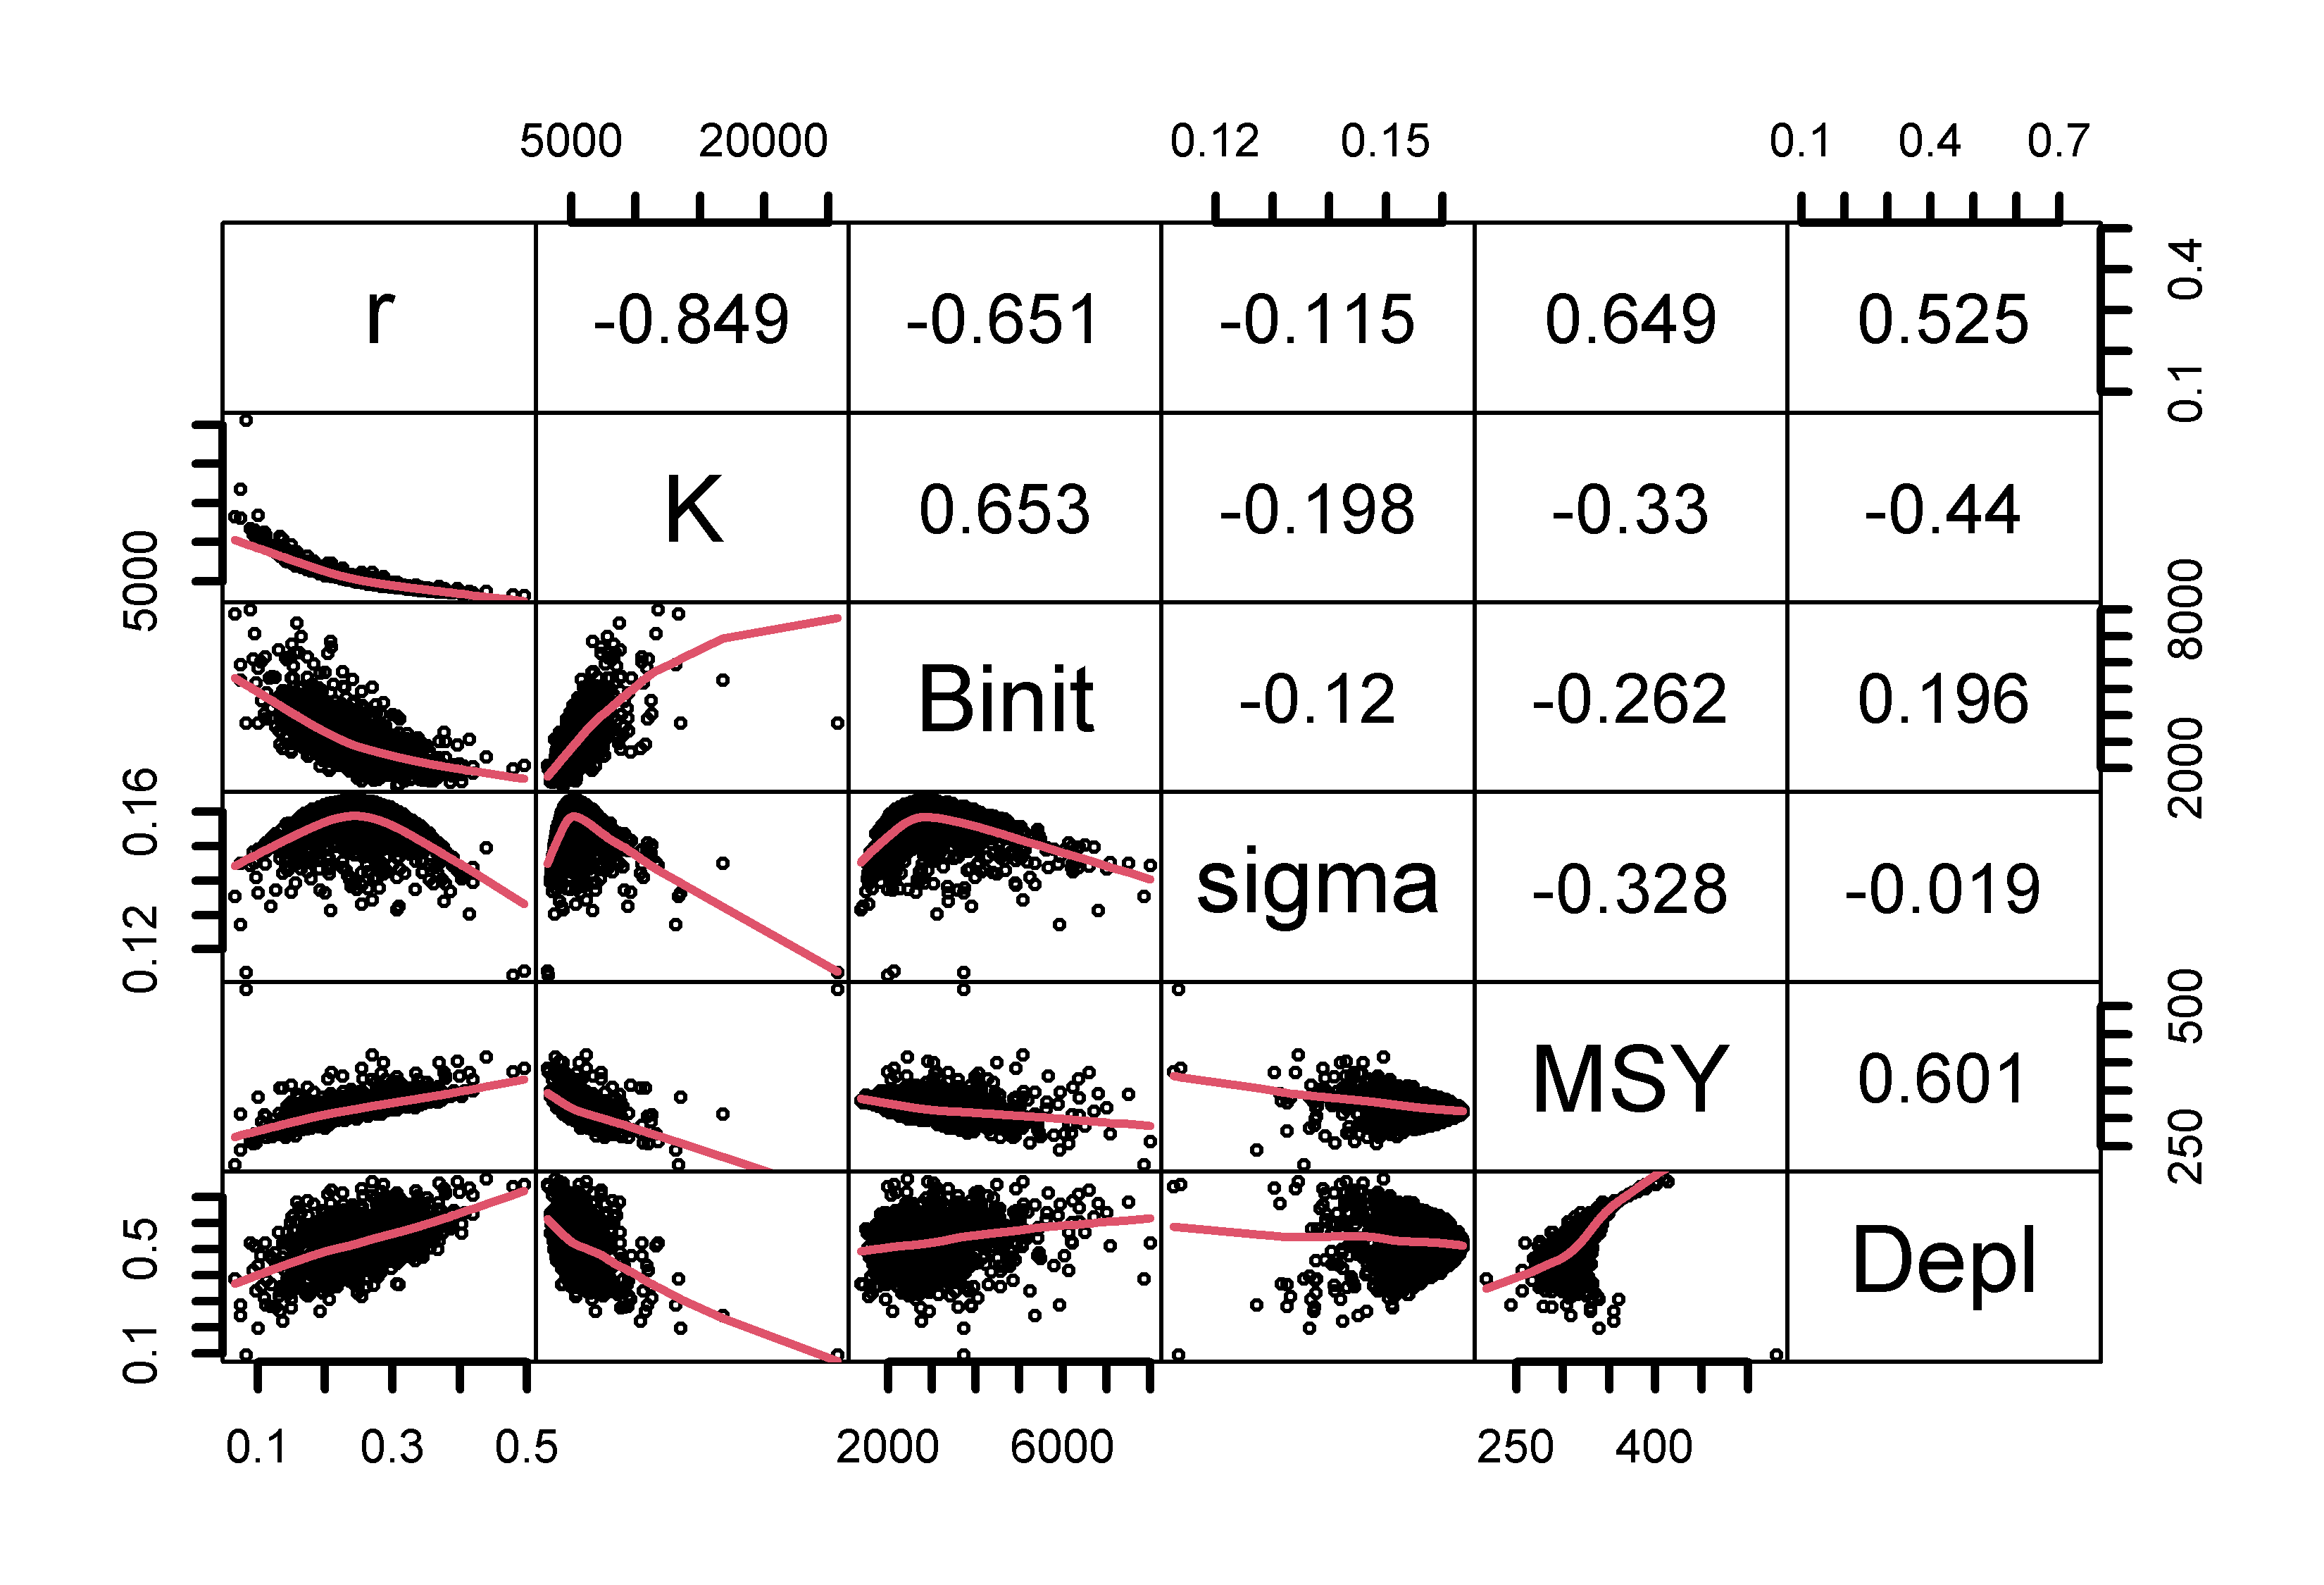 The relationships between the model parameters and some outputs for the Schaefer model (use bootsF$bootpar for the Fox model ). The lower panels have a red smoother line through the data illustrating any trends, while the upper panels have the linear correlation coefficient. The few extreme values distort the plots.